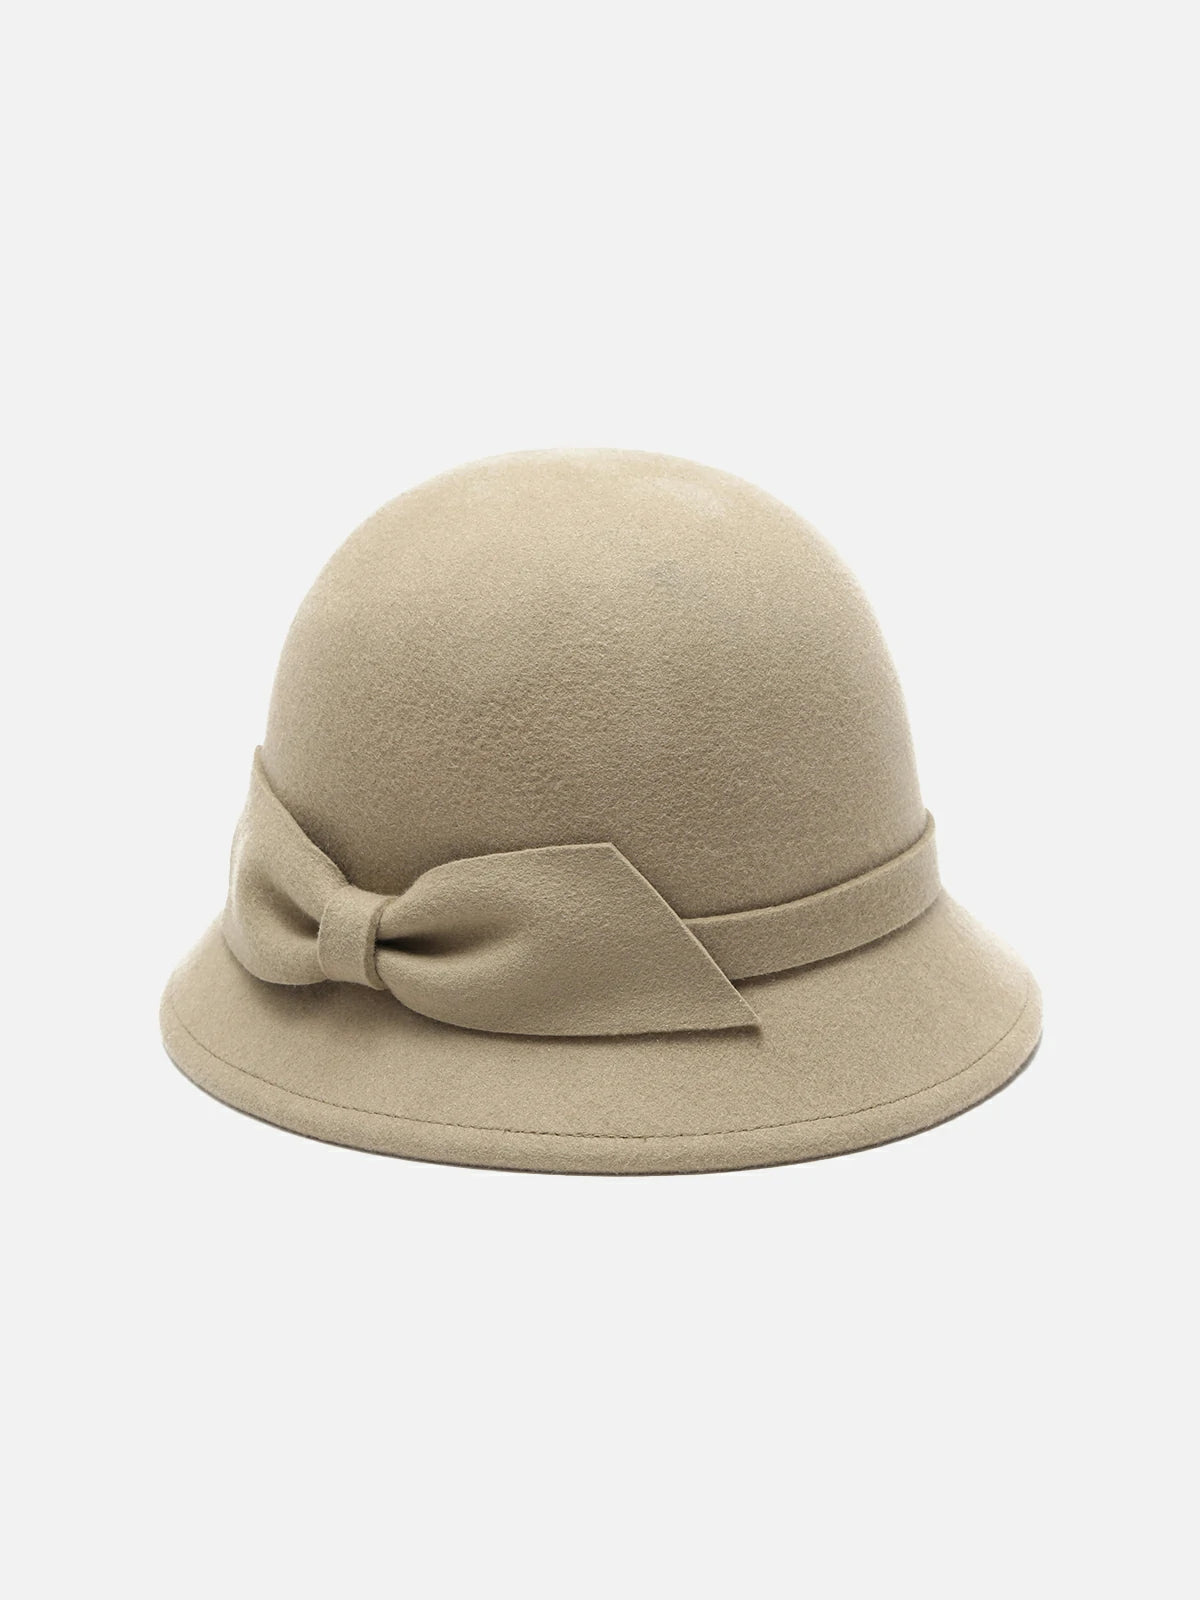 Woolen Bow Bucket Hat with Versatile Style: Suitable for different outfits.